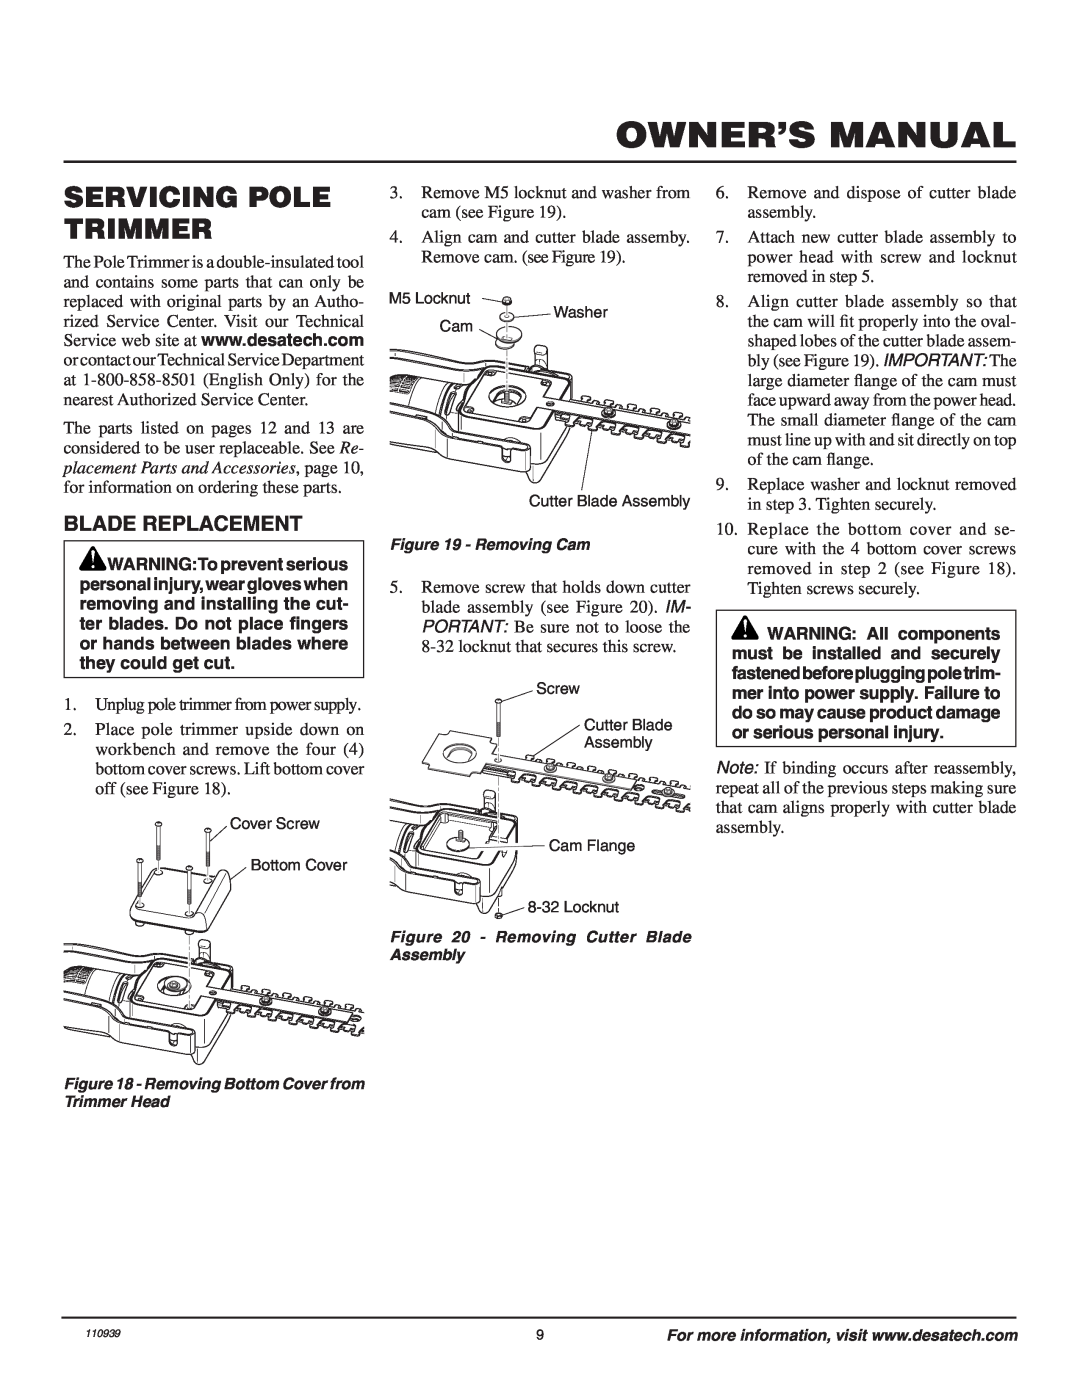 Remington 110946-01A owner manual Servicing Pole Trimmer, Blade Replacement 